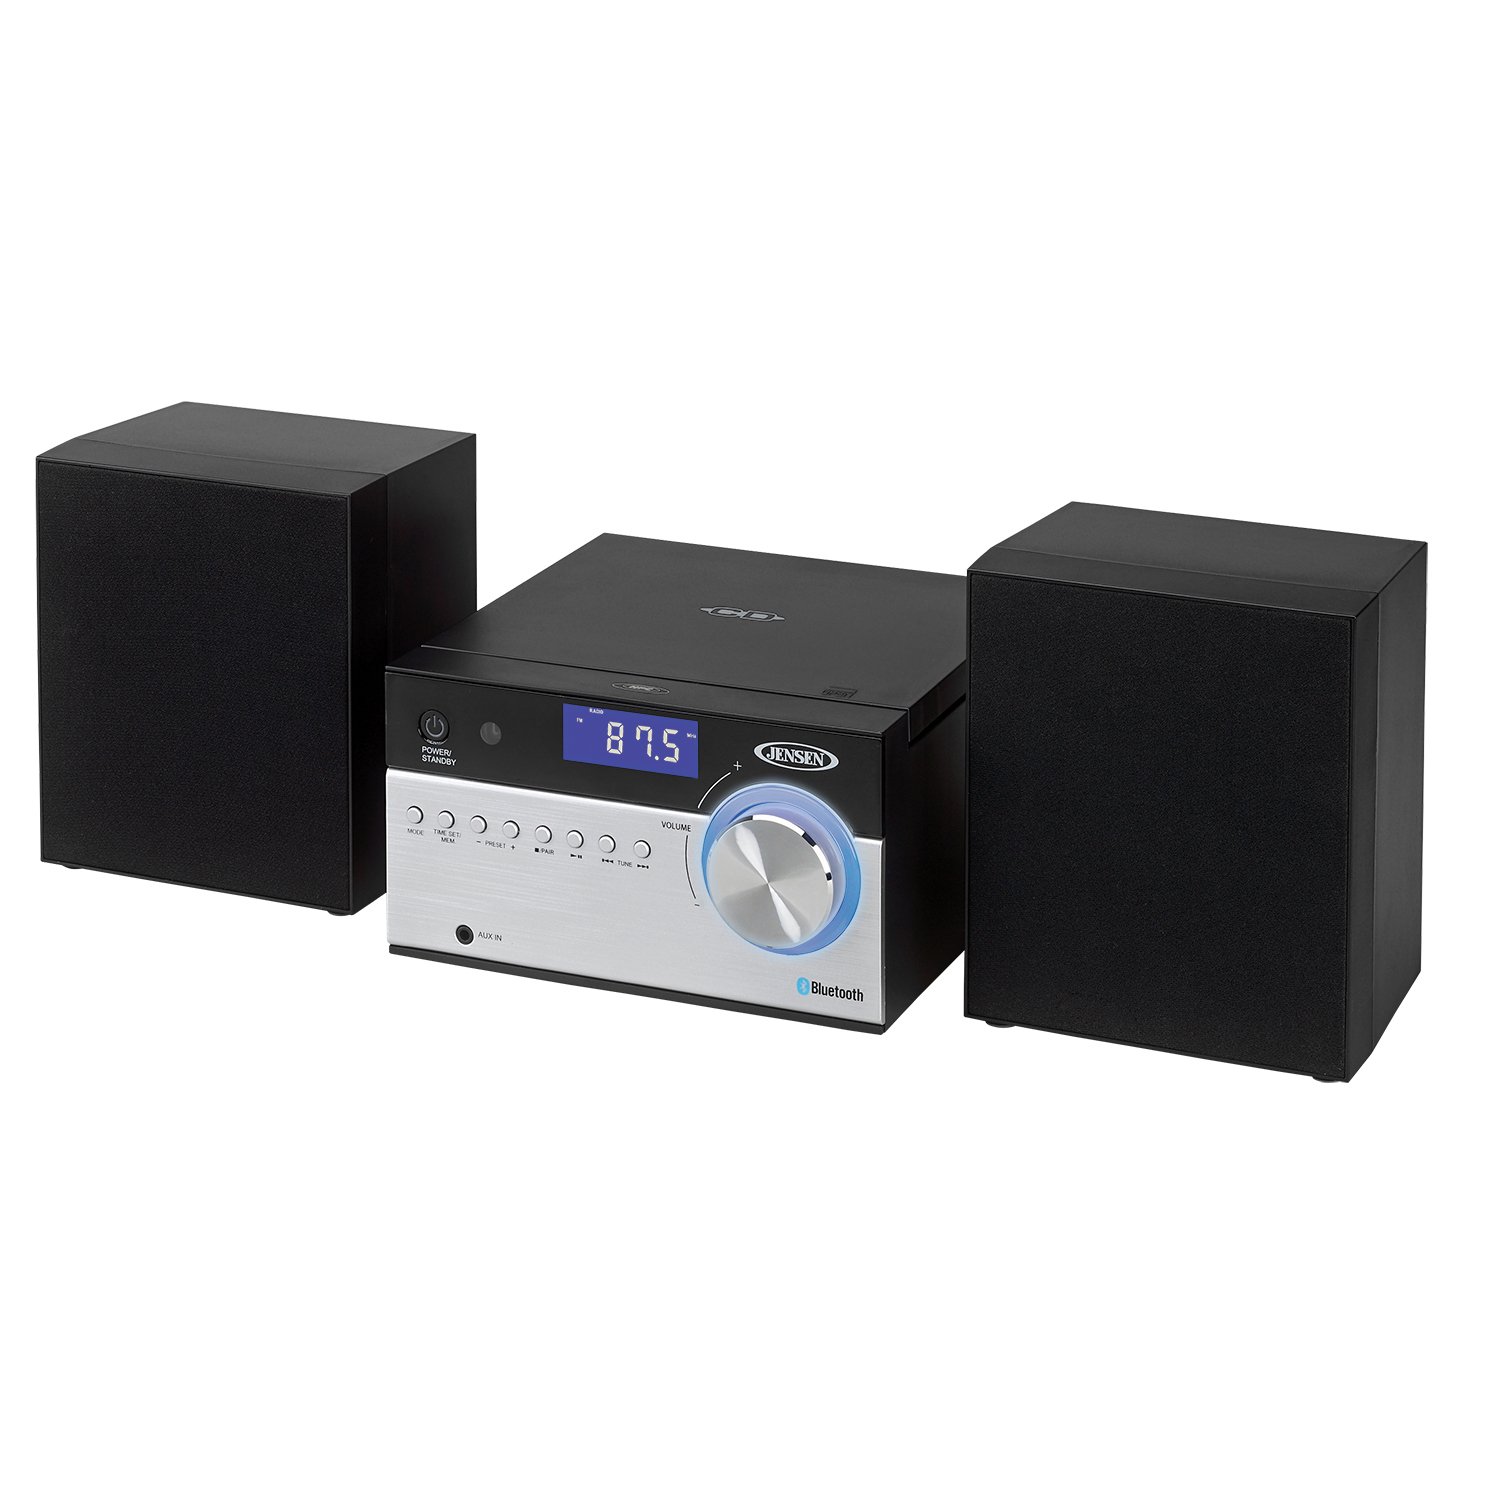 Jensen Bluetooth Music System with CD Player and Digital AM/FM Radio Stereo Receiver, Remote Control Included - image 1 of 3